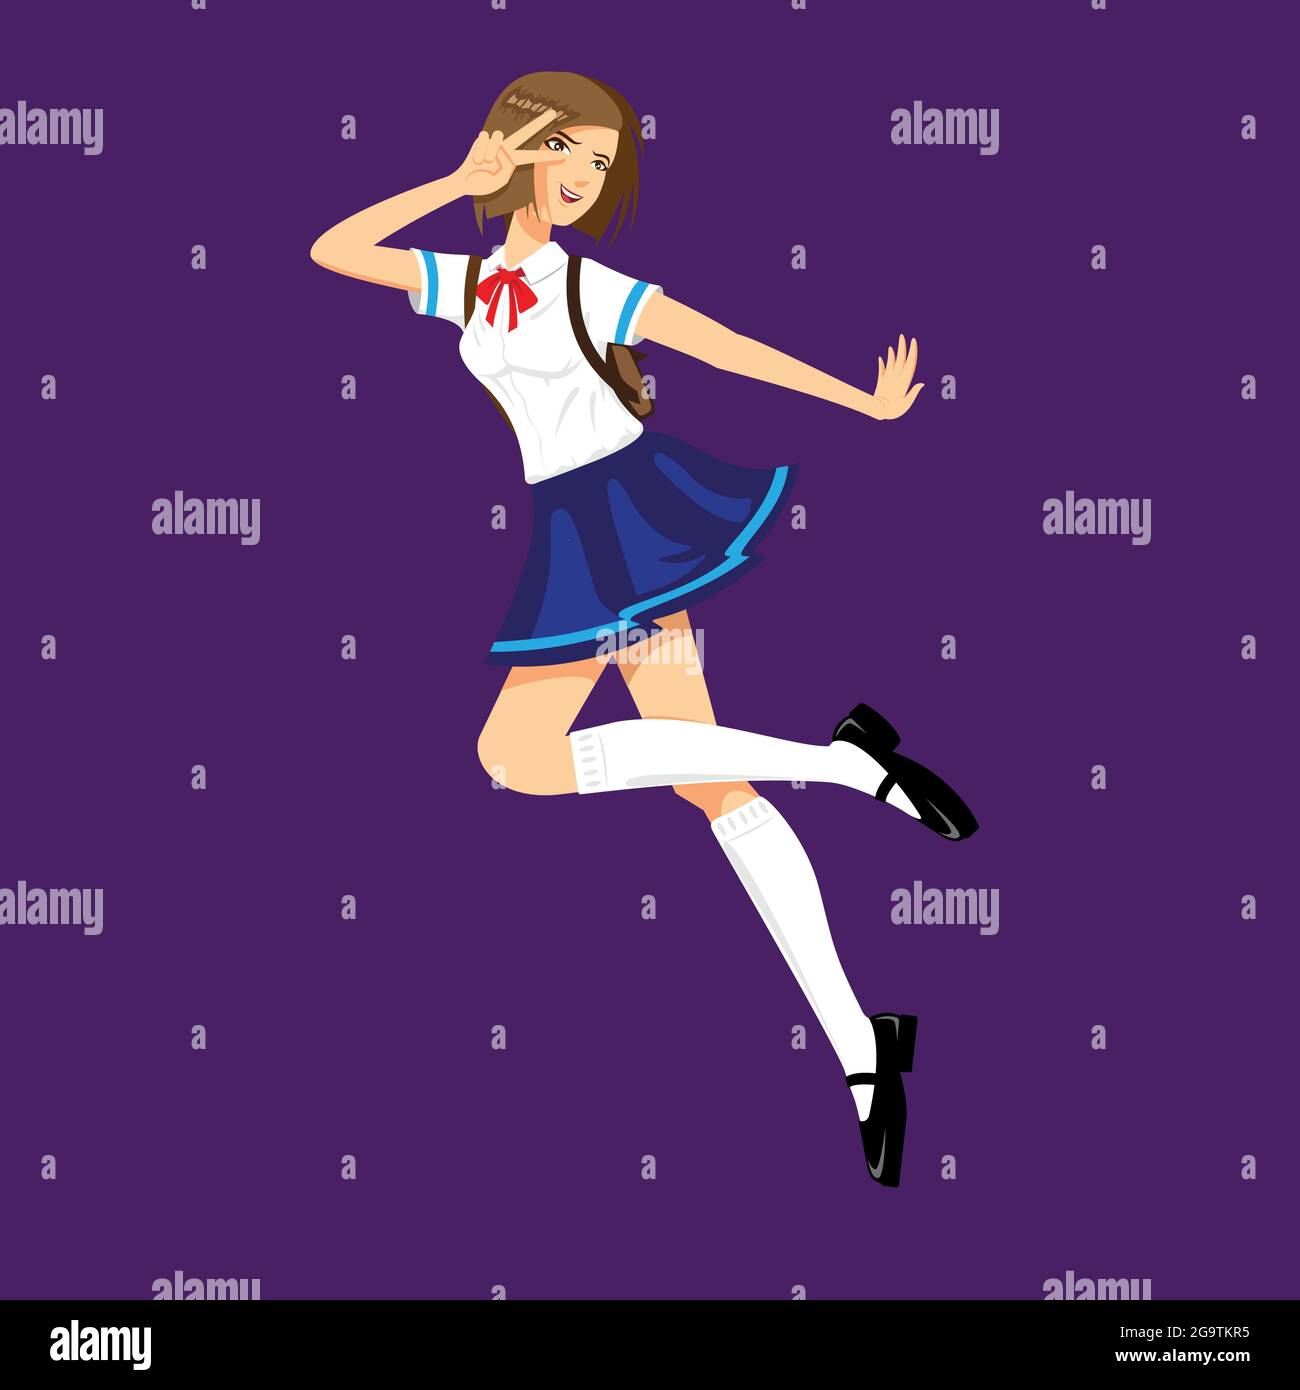 School Girl manga style.vector illustration in anime style for design element, poster, tshirt print, or any other purpose. Stock Vector